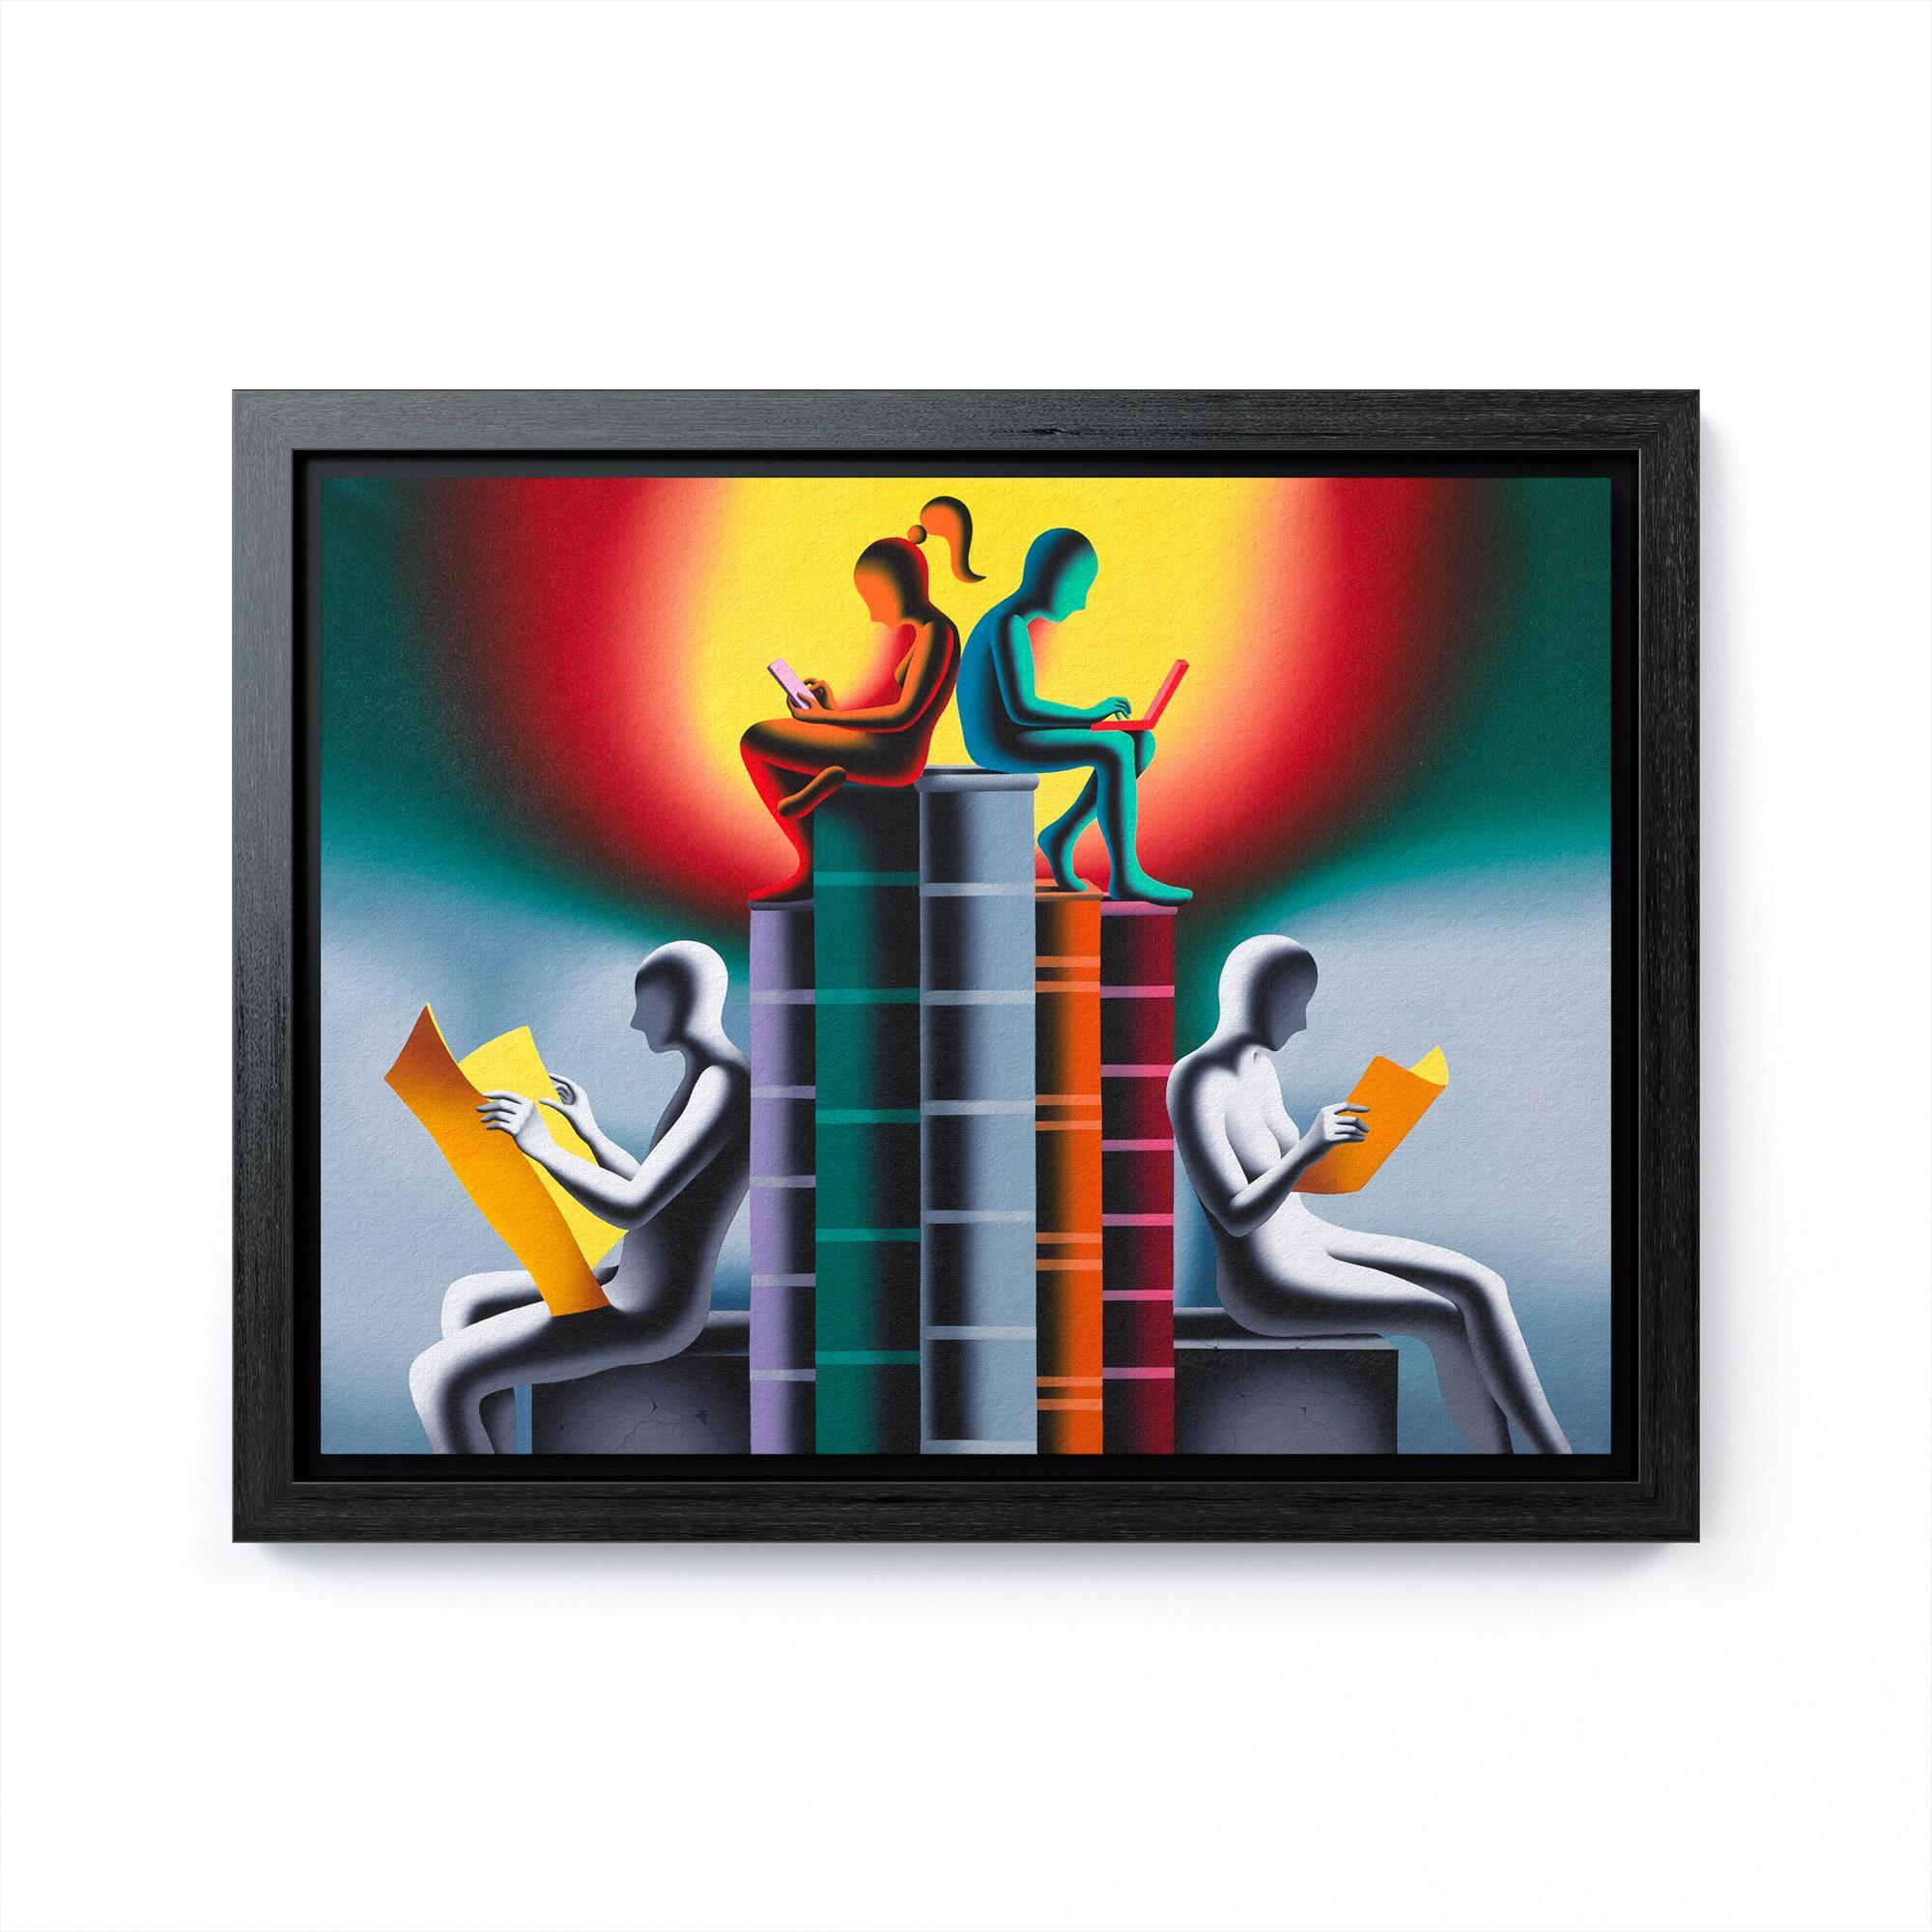 Volumes of Technology - Painting by Mark Kostabi